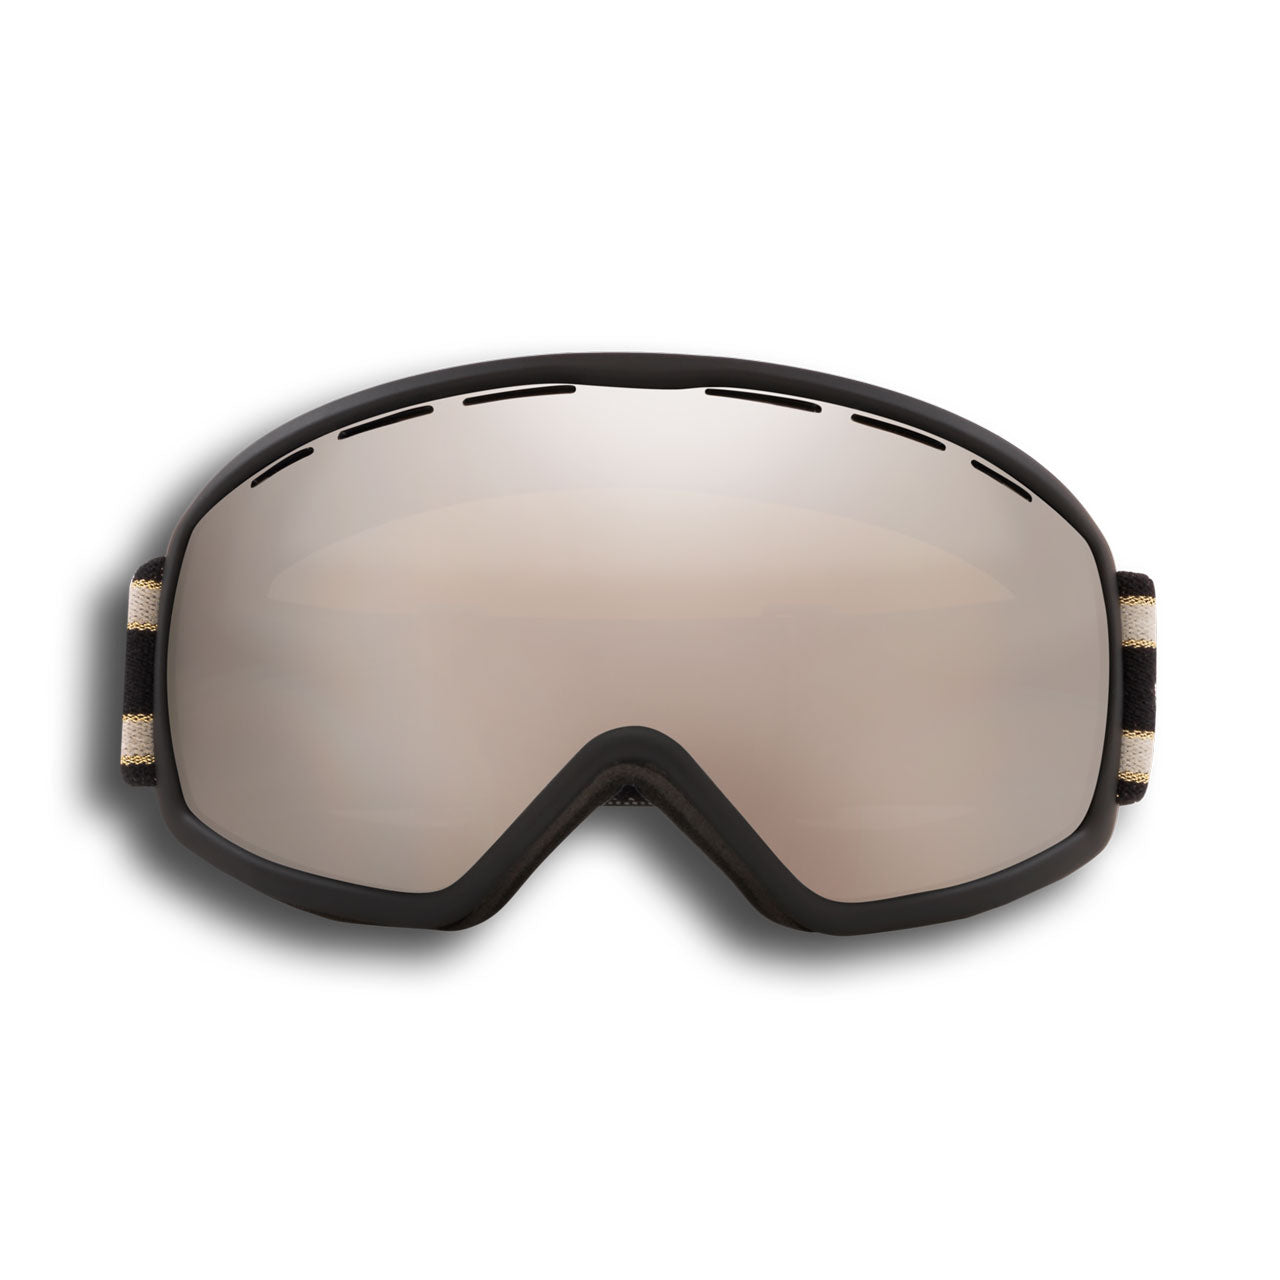 Oliver Peoples Aspen Snow Goggles | Uncrate